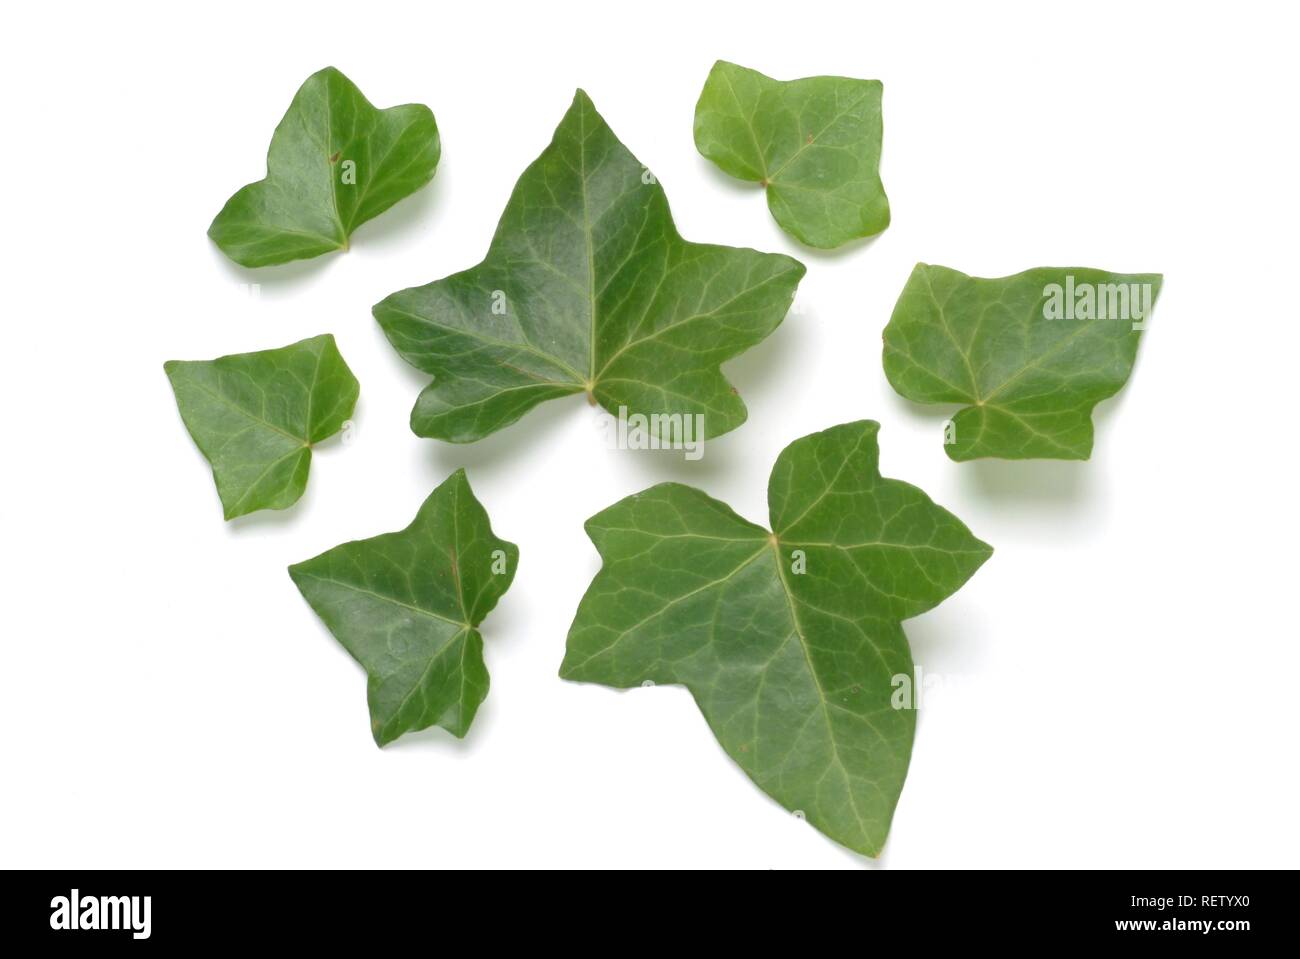 Ivy leaves (Hedera helix), medicinal plant Stock Photo